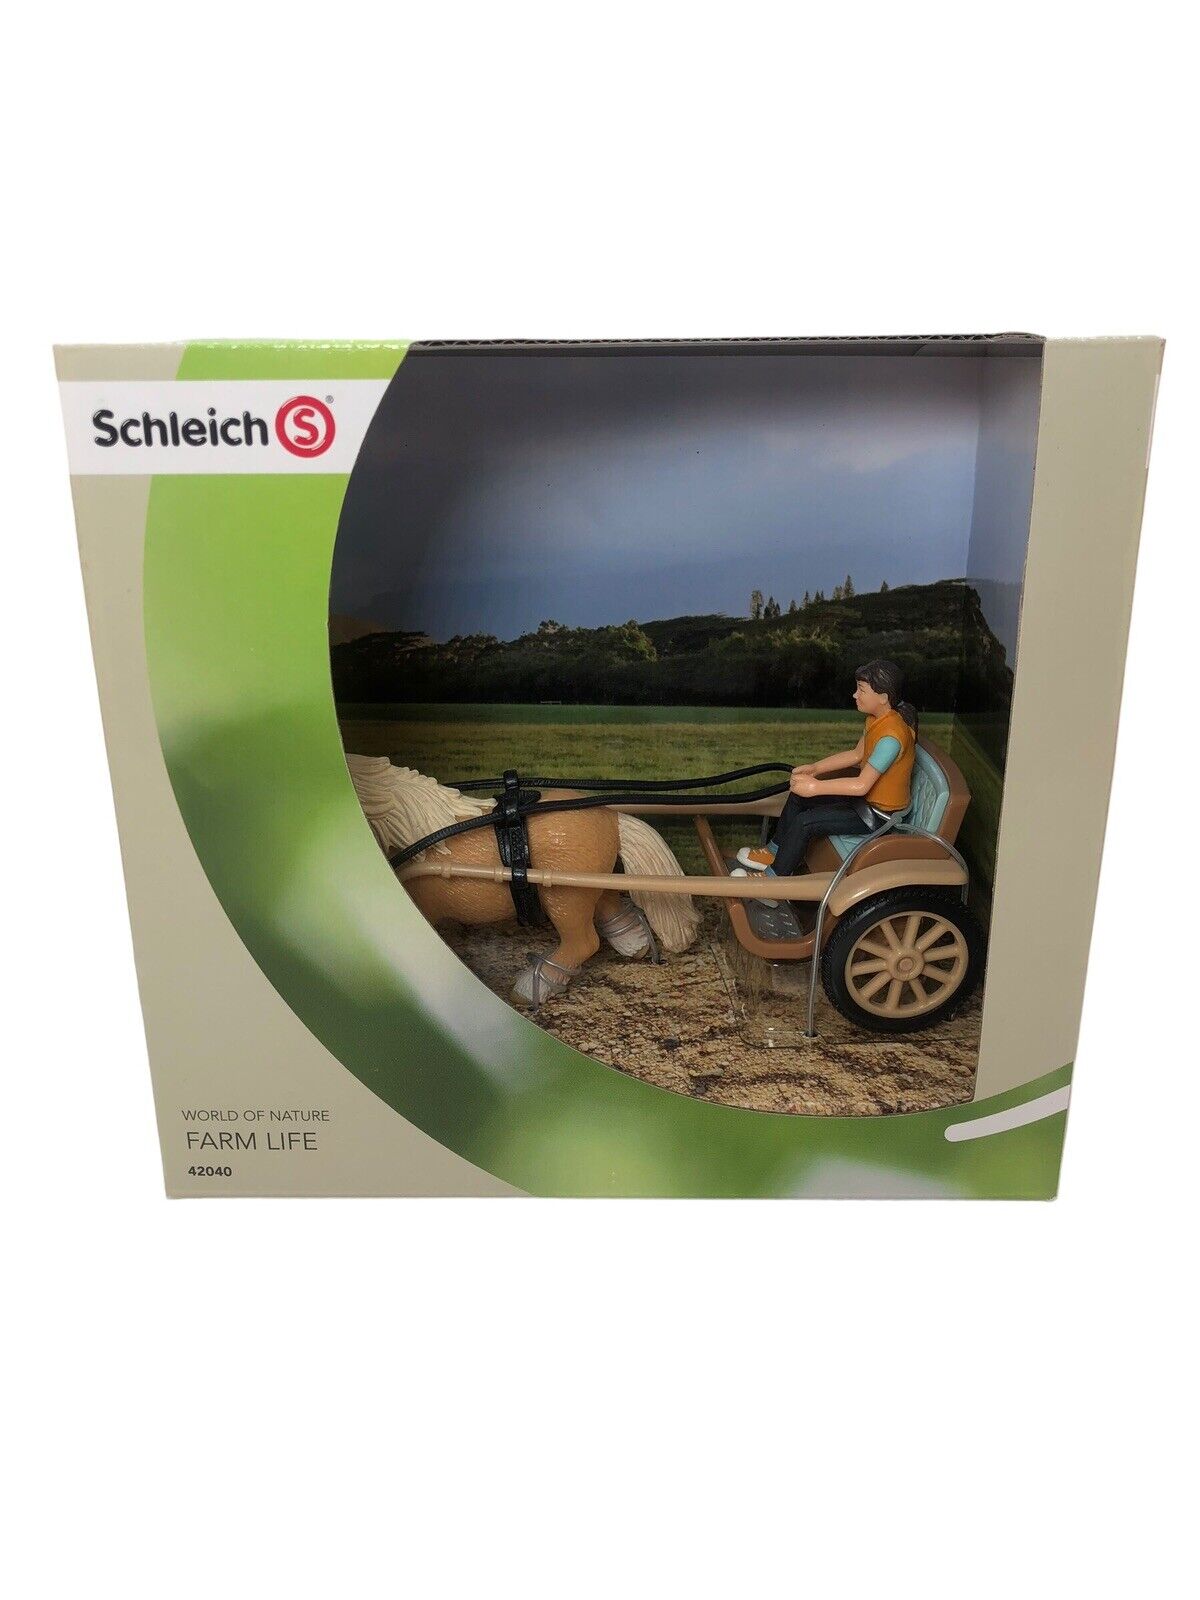 Schleich Shetland Pony & Cart 42040 Rare Retired Boxed New World Of Nature